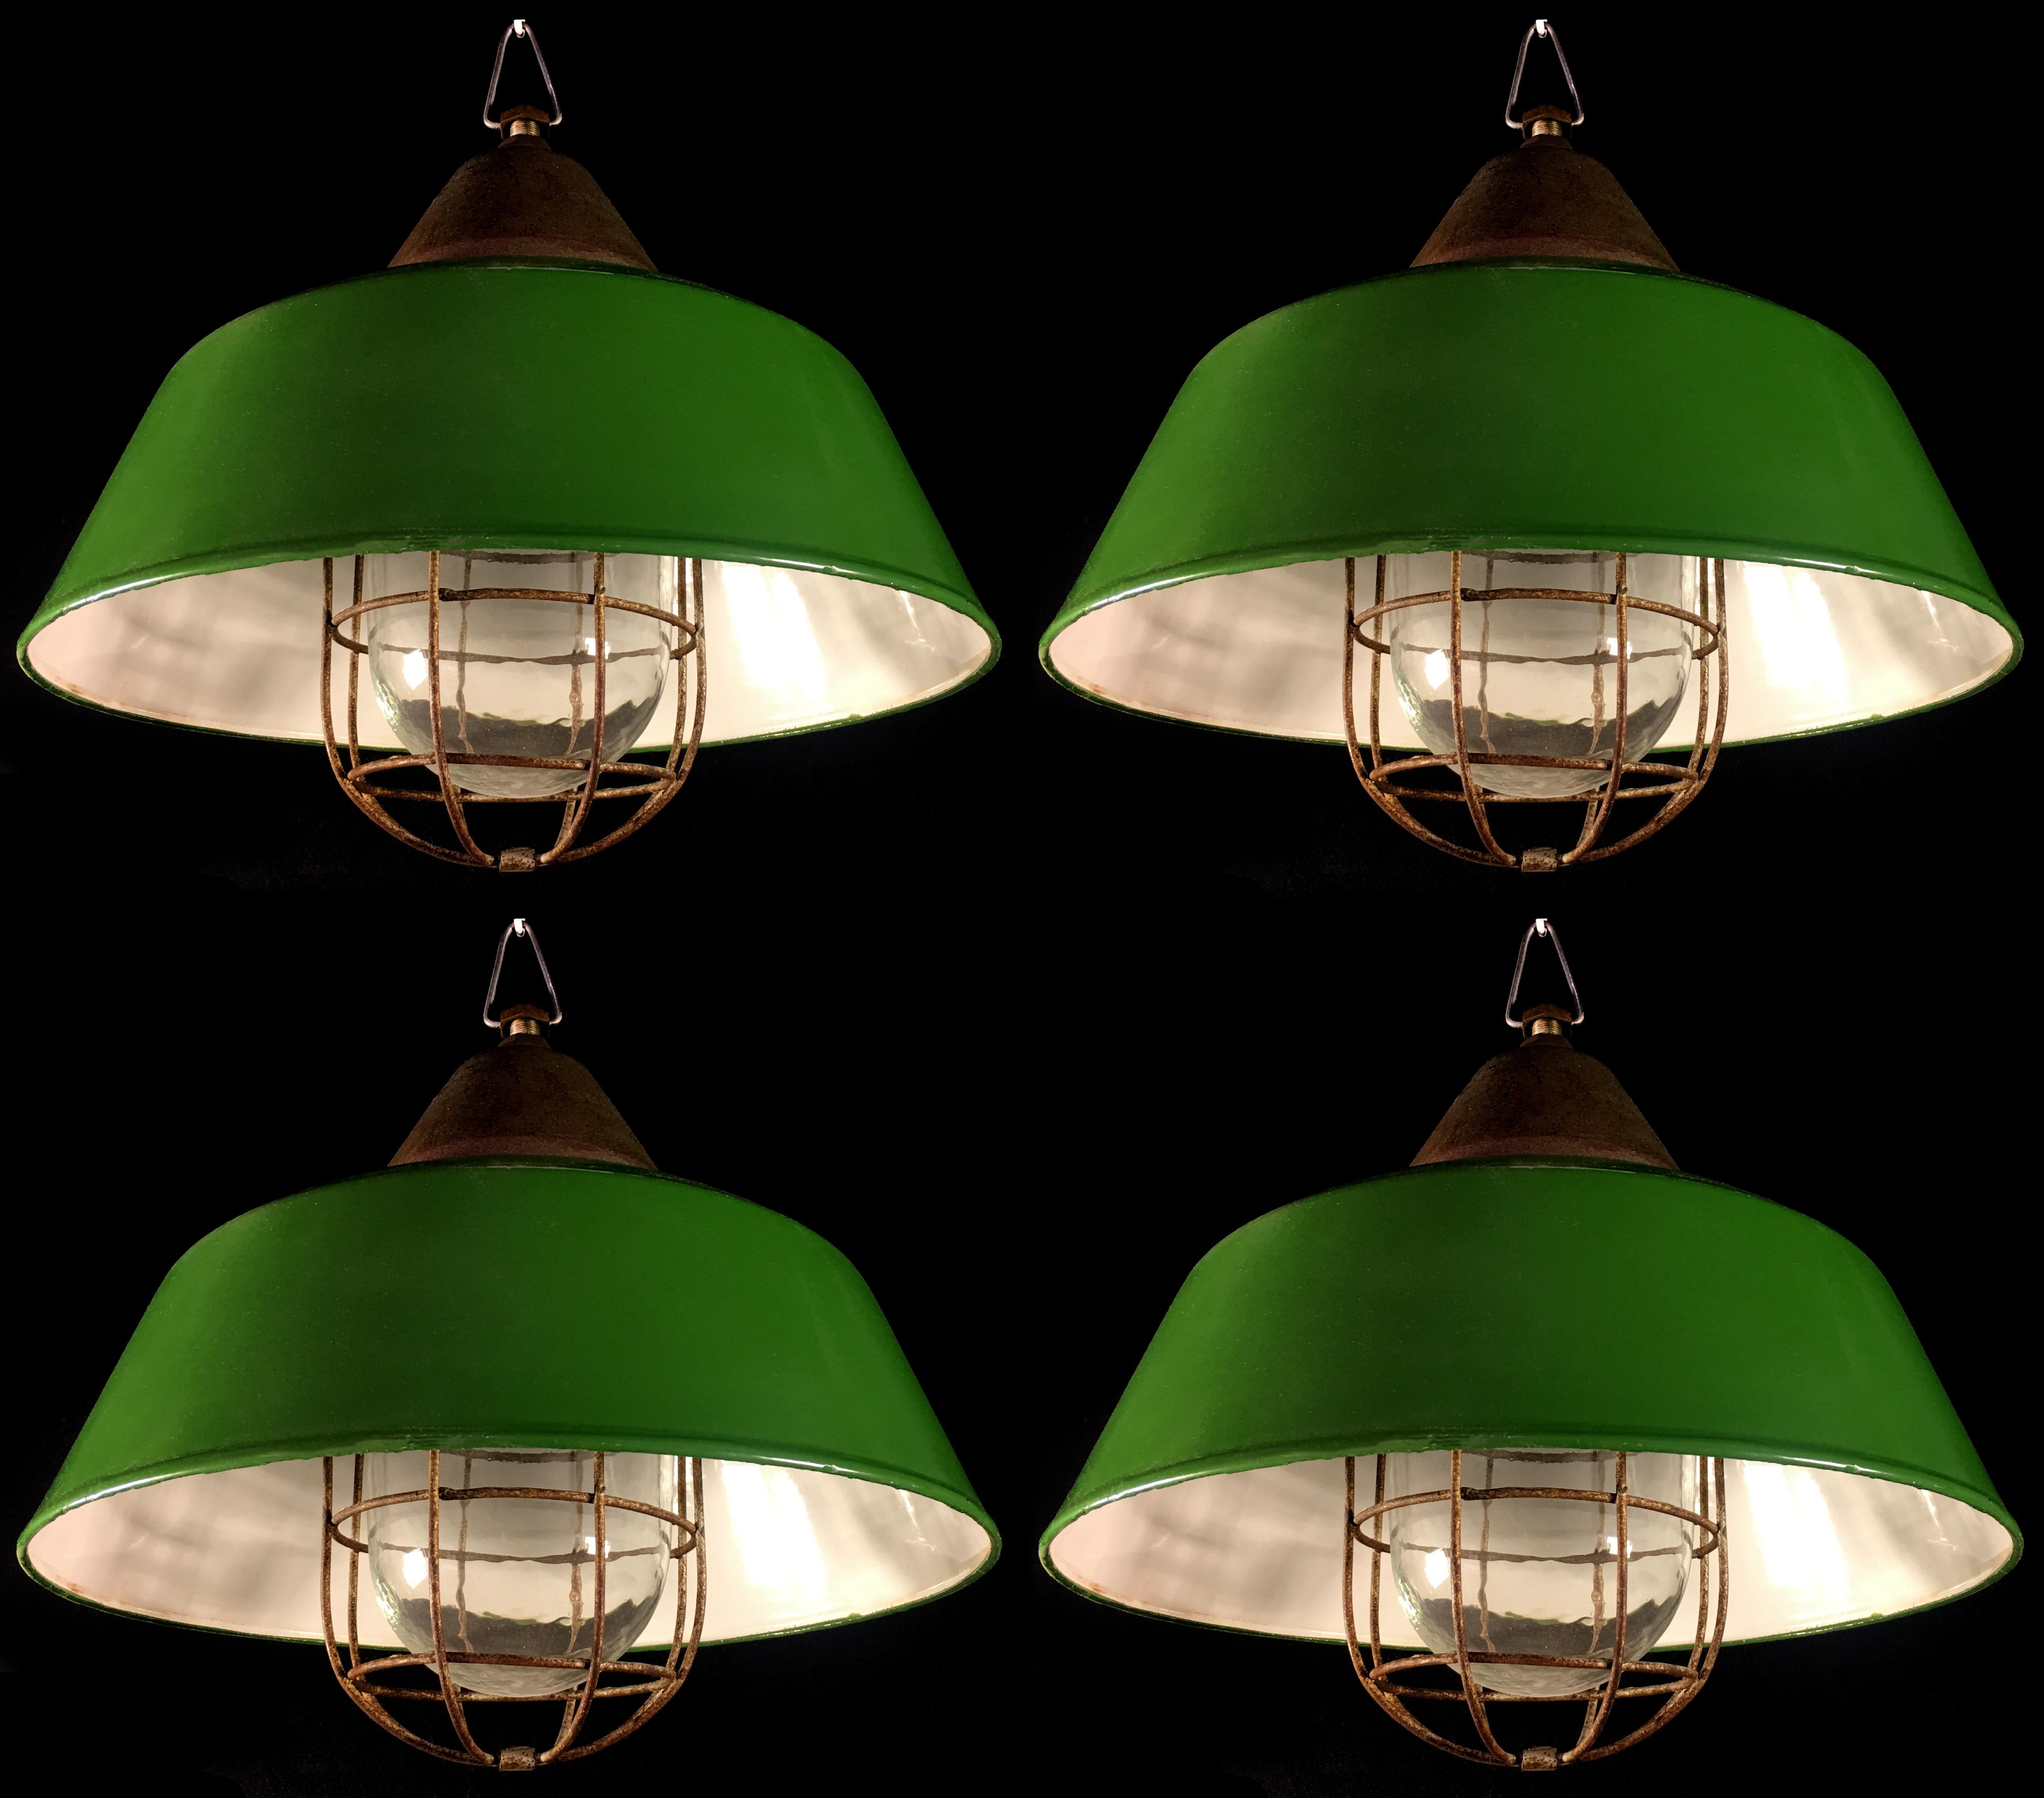 Hungarian Set of Four Multicolor Industrial Pendant Lights, Budapest, 1950s